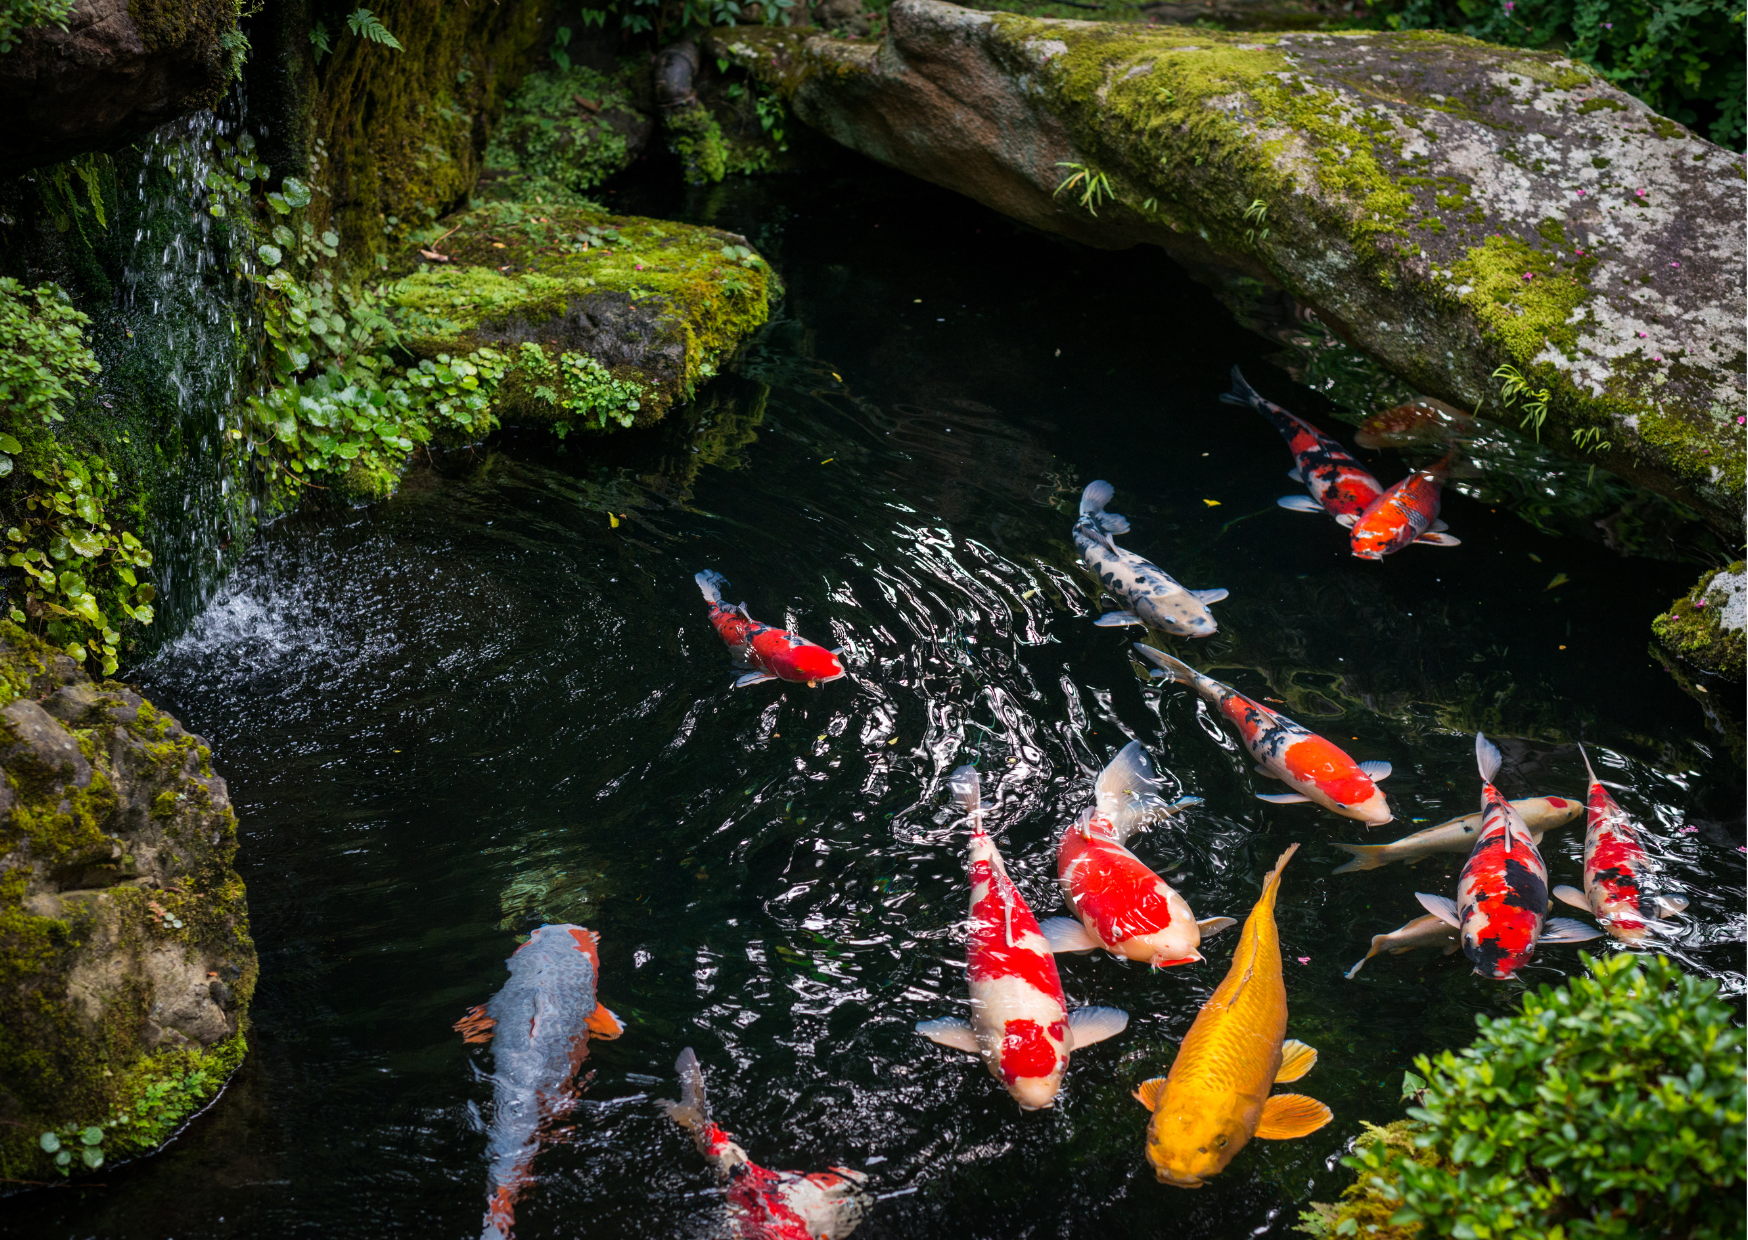 Koi Fish Thefts | Misguided Theives